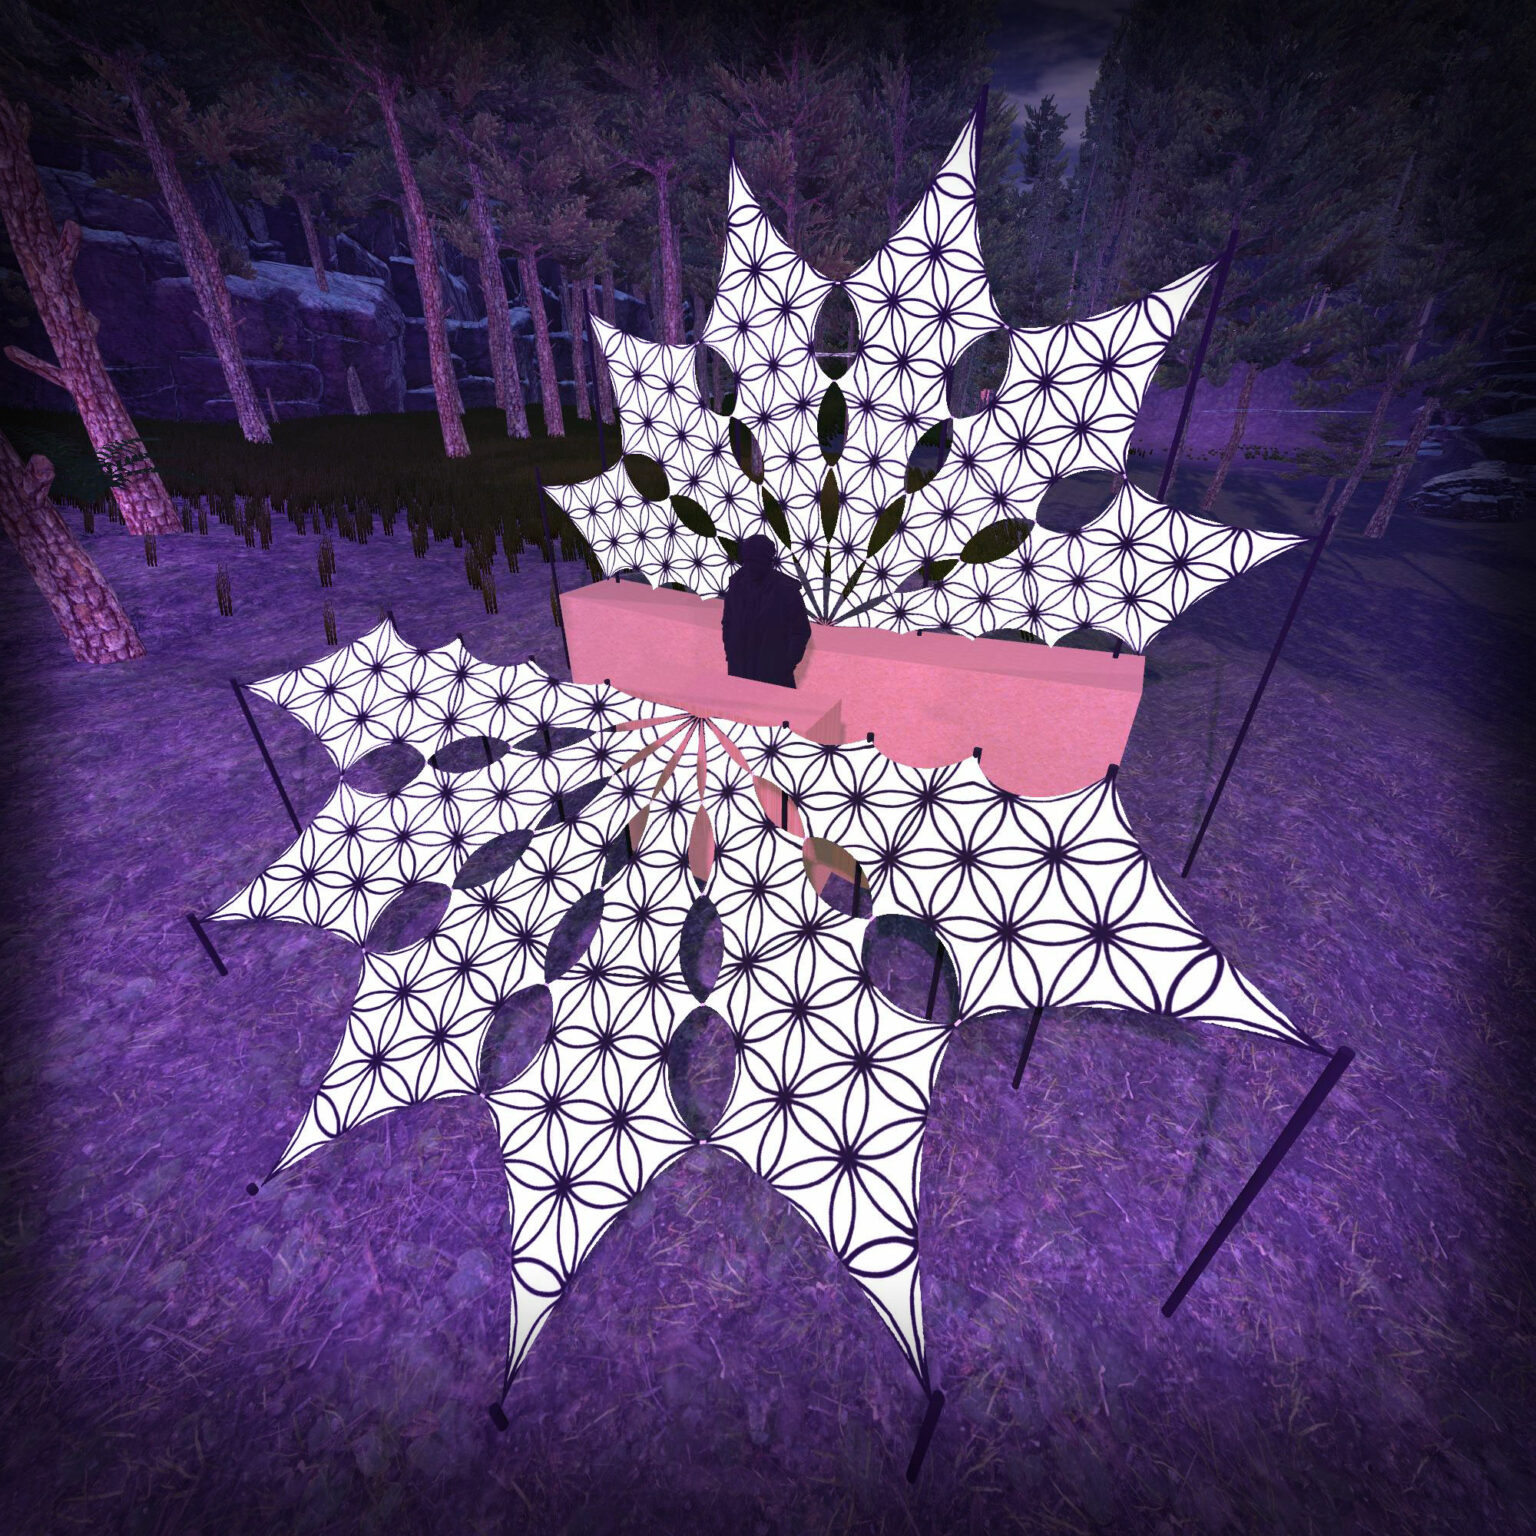 FL-PT01 - Psychedelic Black and White DJ-Stage - 12 petals set - 3D-Preview - Forest - "Flower of Life" Collection